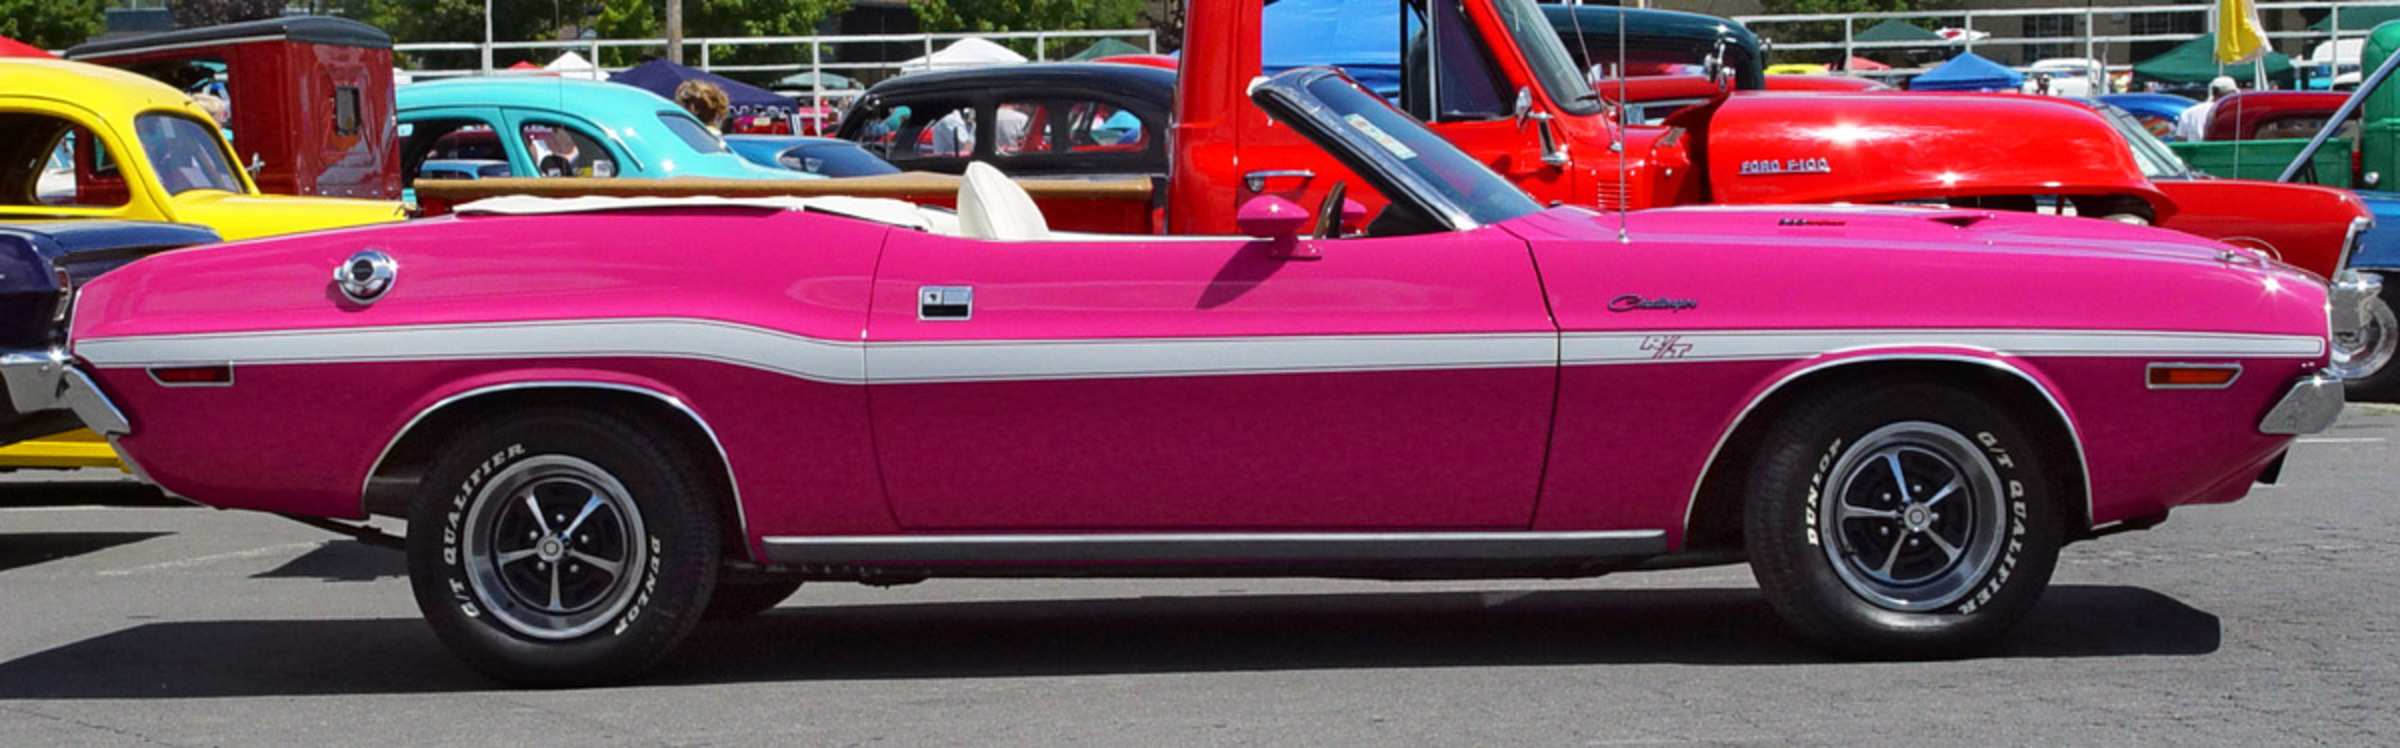 1970 Dodge Challenger R/T Convertible - Pink - Side